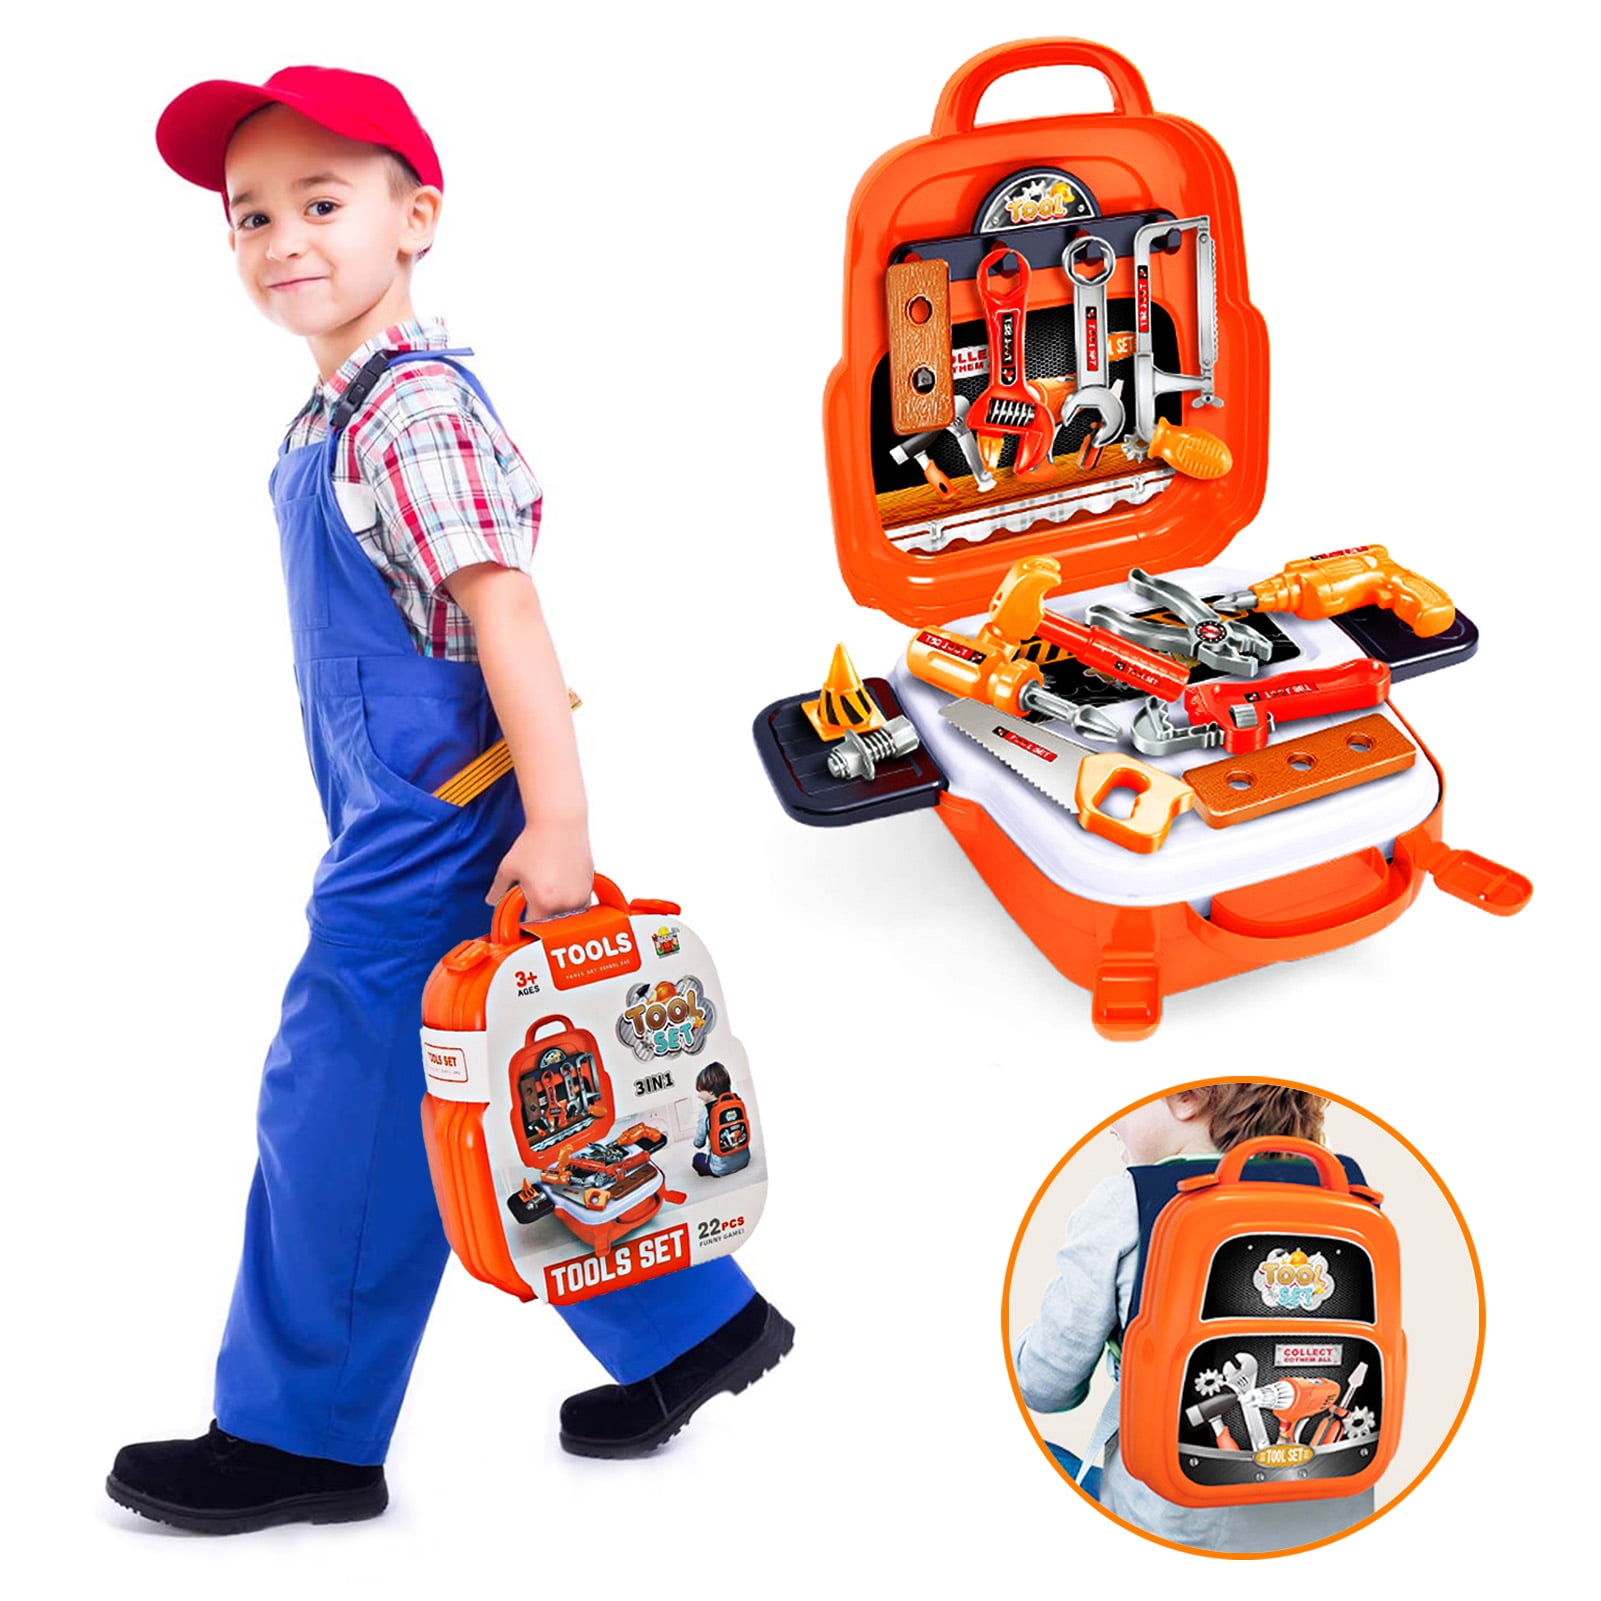 Pretend Play Construction Toy with Tool Box New LOYO Kids Tool Set 